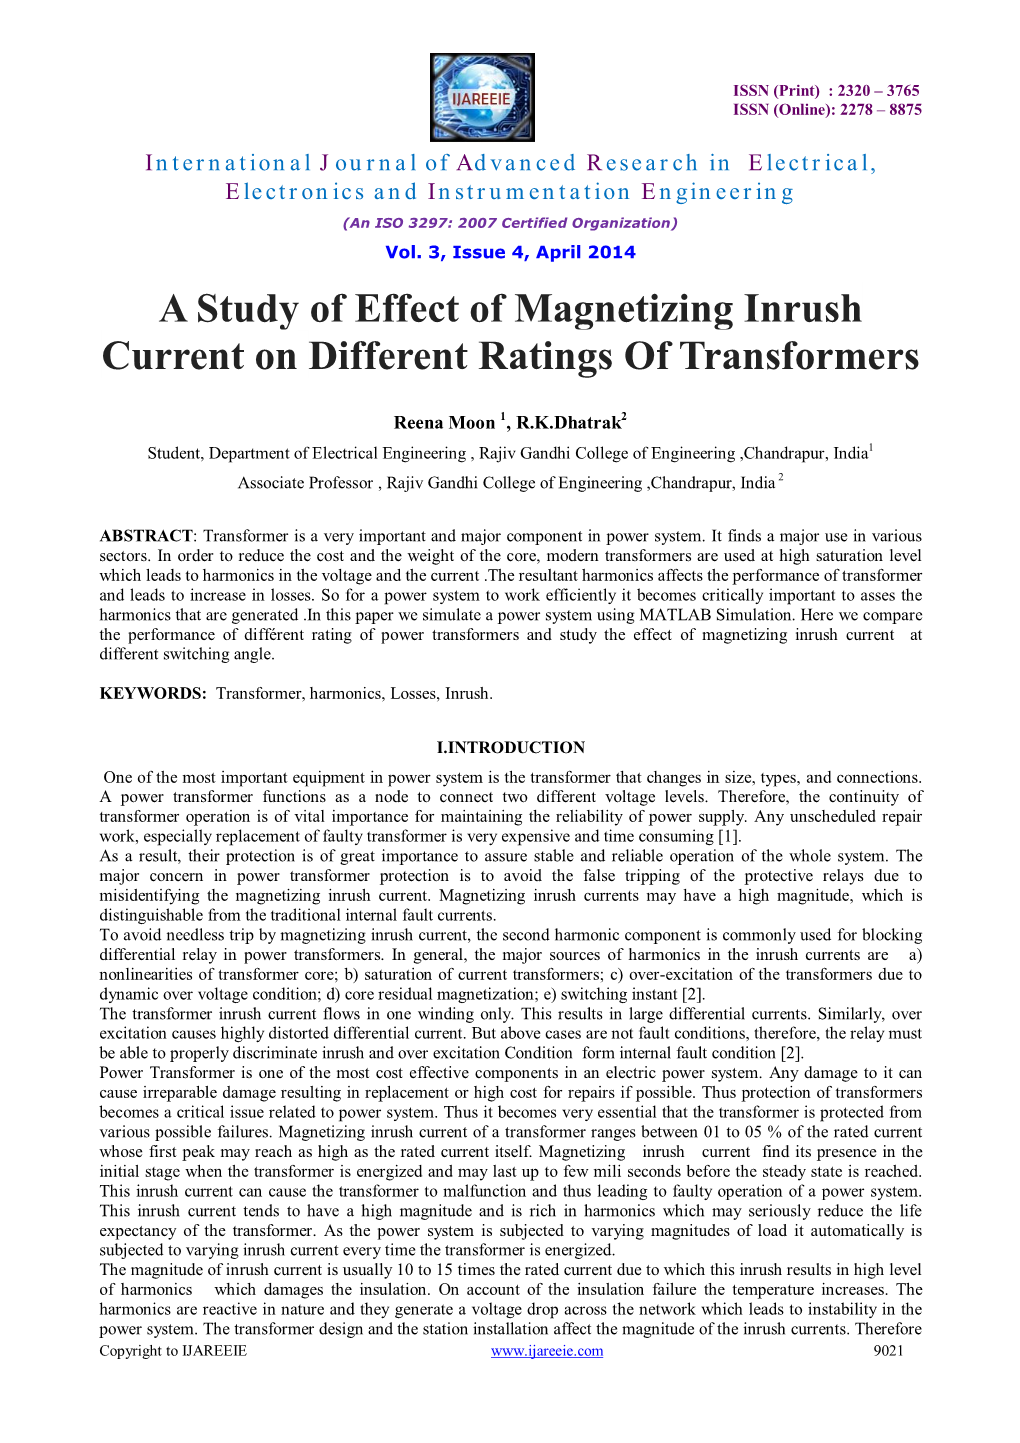 A Study of Effect of Magnetizing Inrush Current on Different Ratings of Transformers